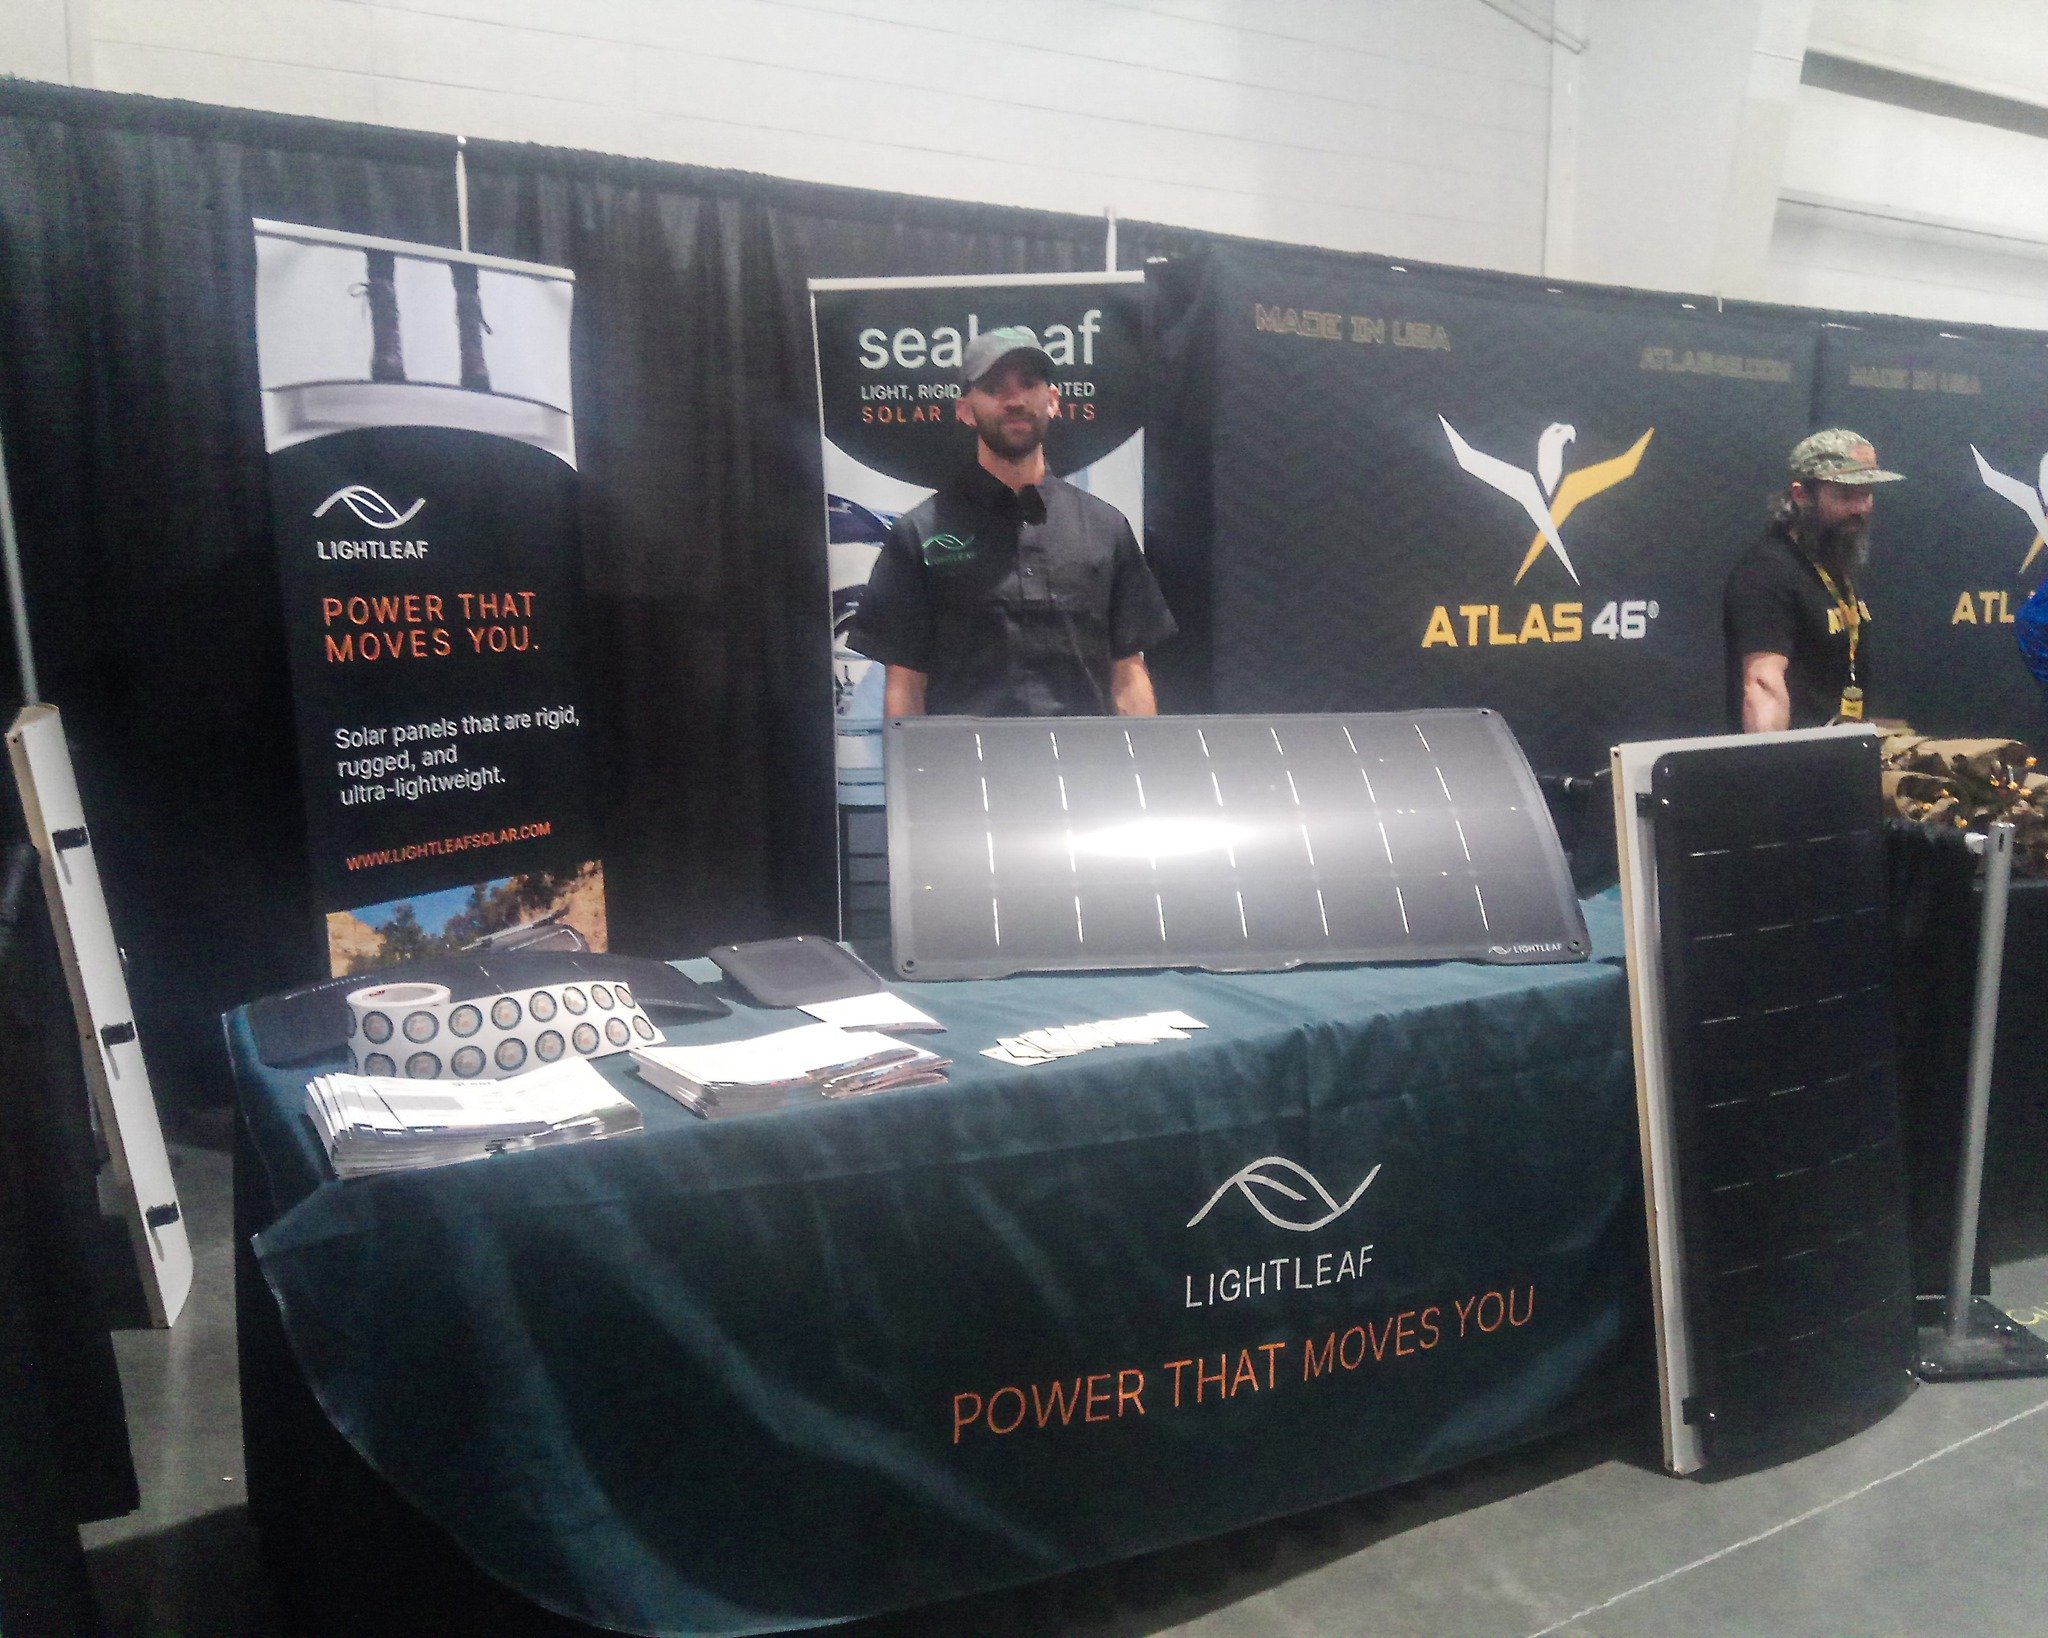 Over the weekend we attended the Moore Overland &amp; Off-Road EXPO in Springfield, MD. We want to thank everyone who stopped by our booth and said hi!

#lightleafsoalr #lls #mooreexpo #overland #overlandexpo #camping #solarpower #greenenergy